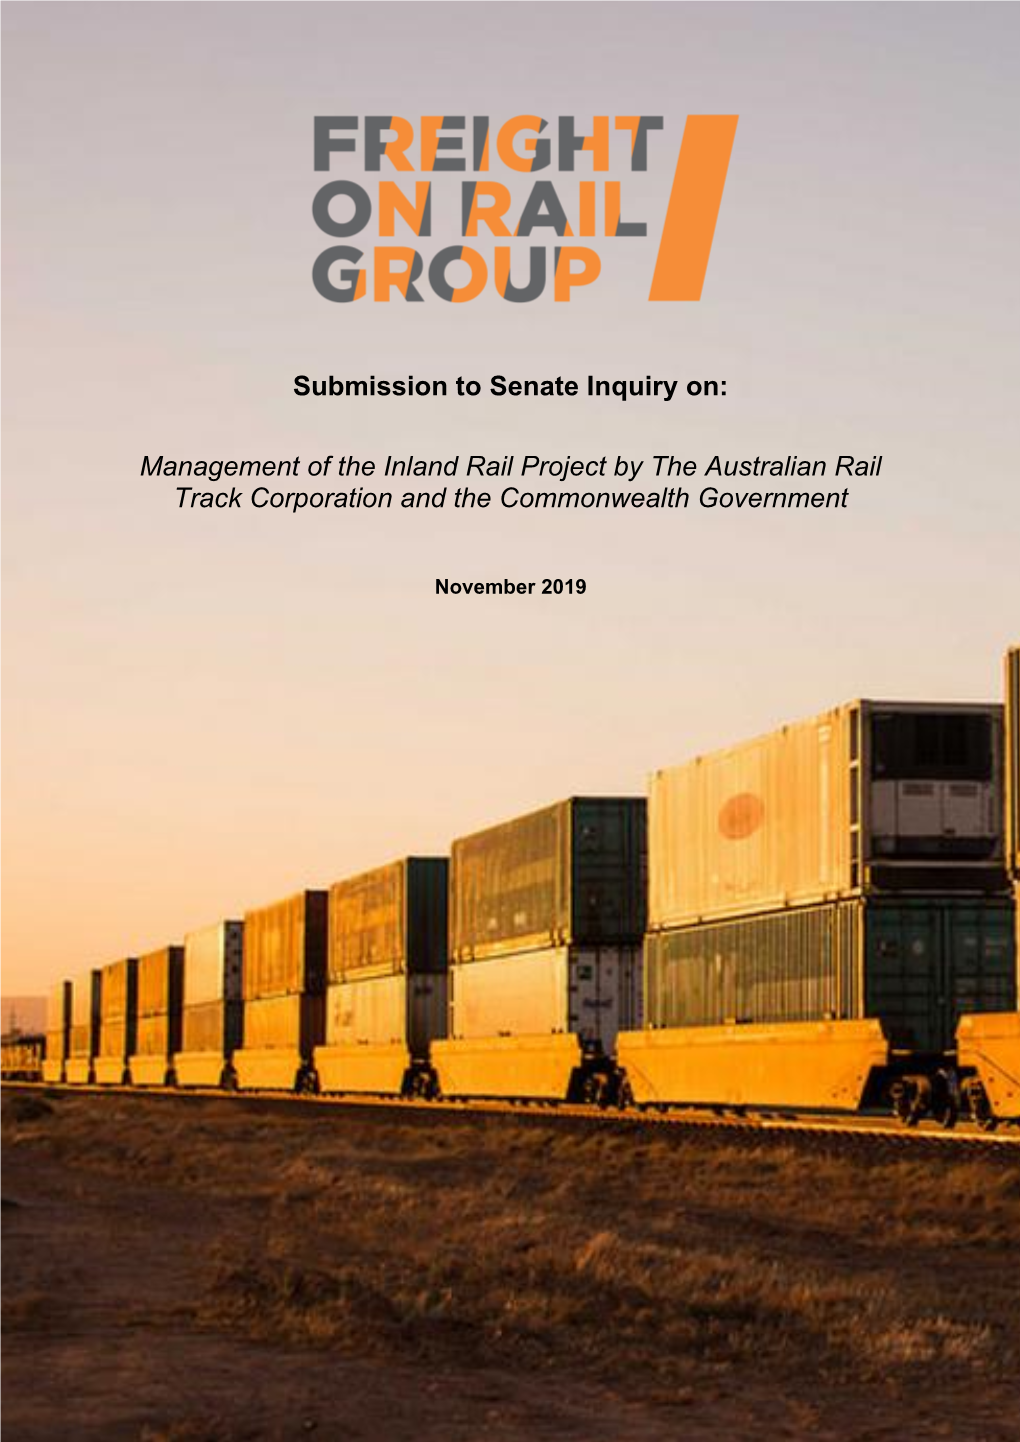 Management of the Inland Rail Project by the Australian Rail Track Corporation and the Commonwealth Government